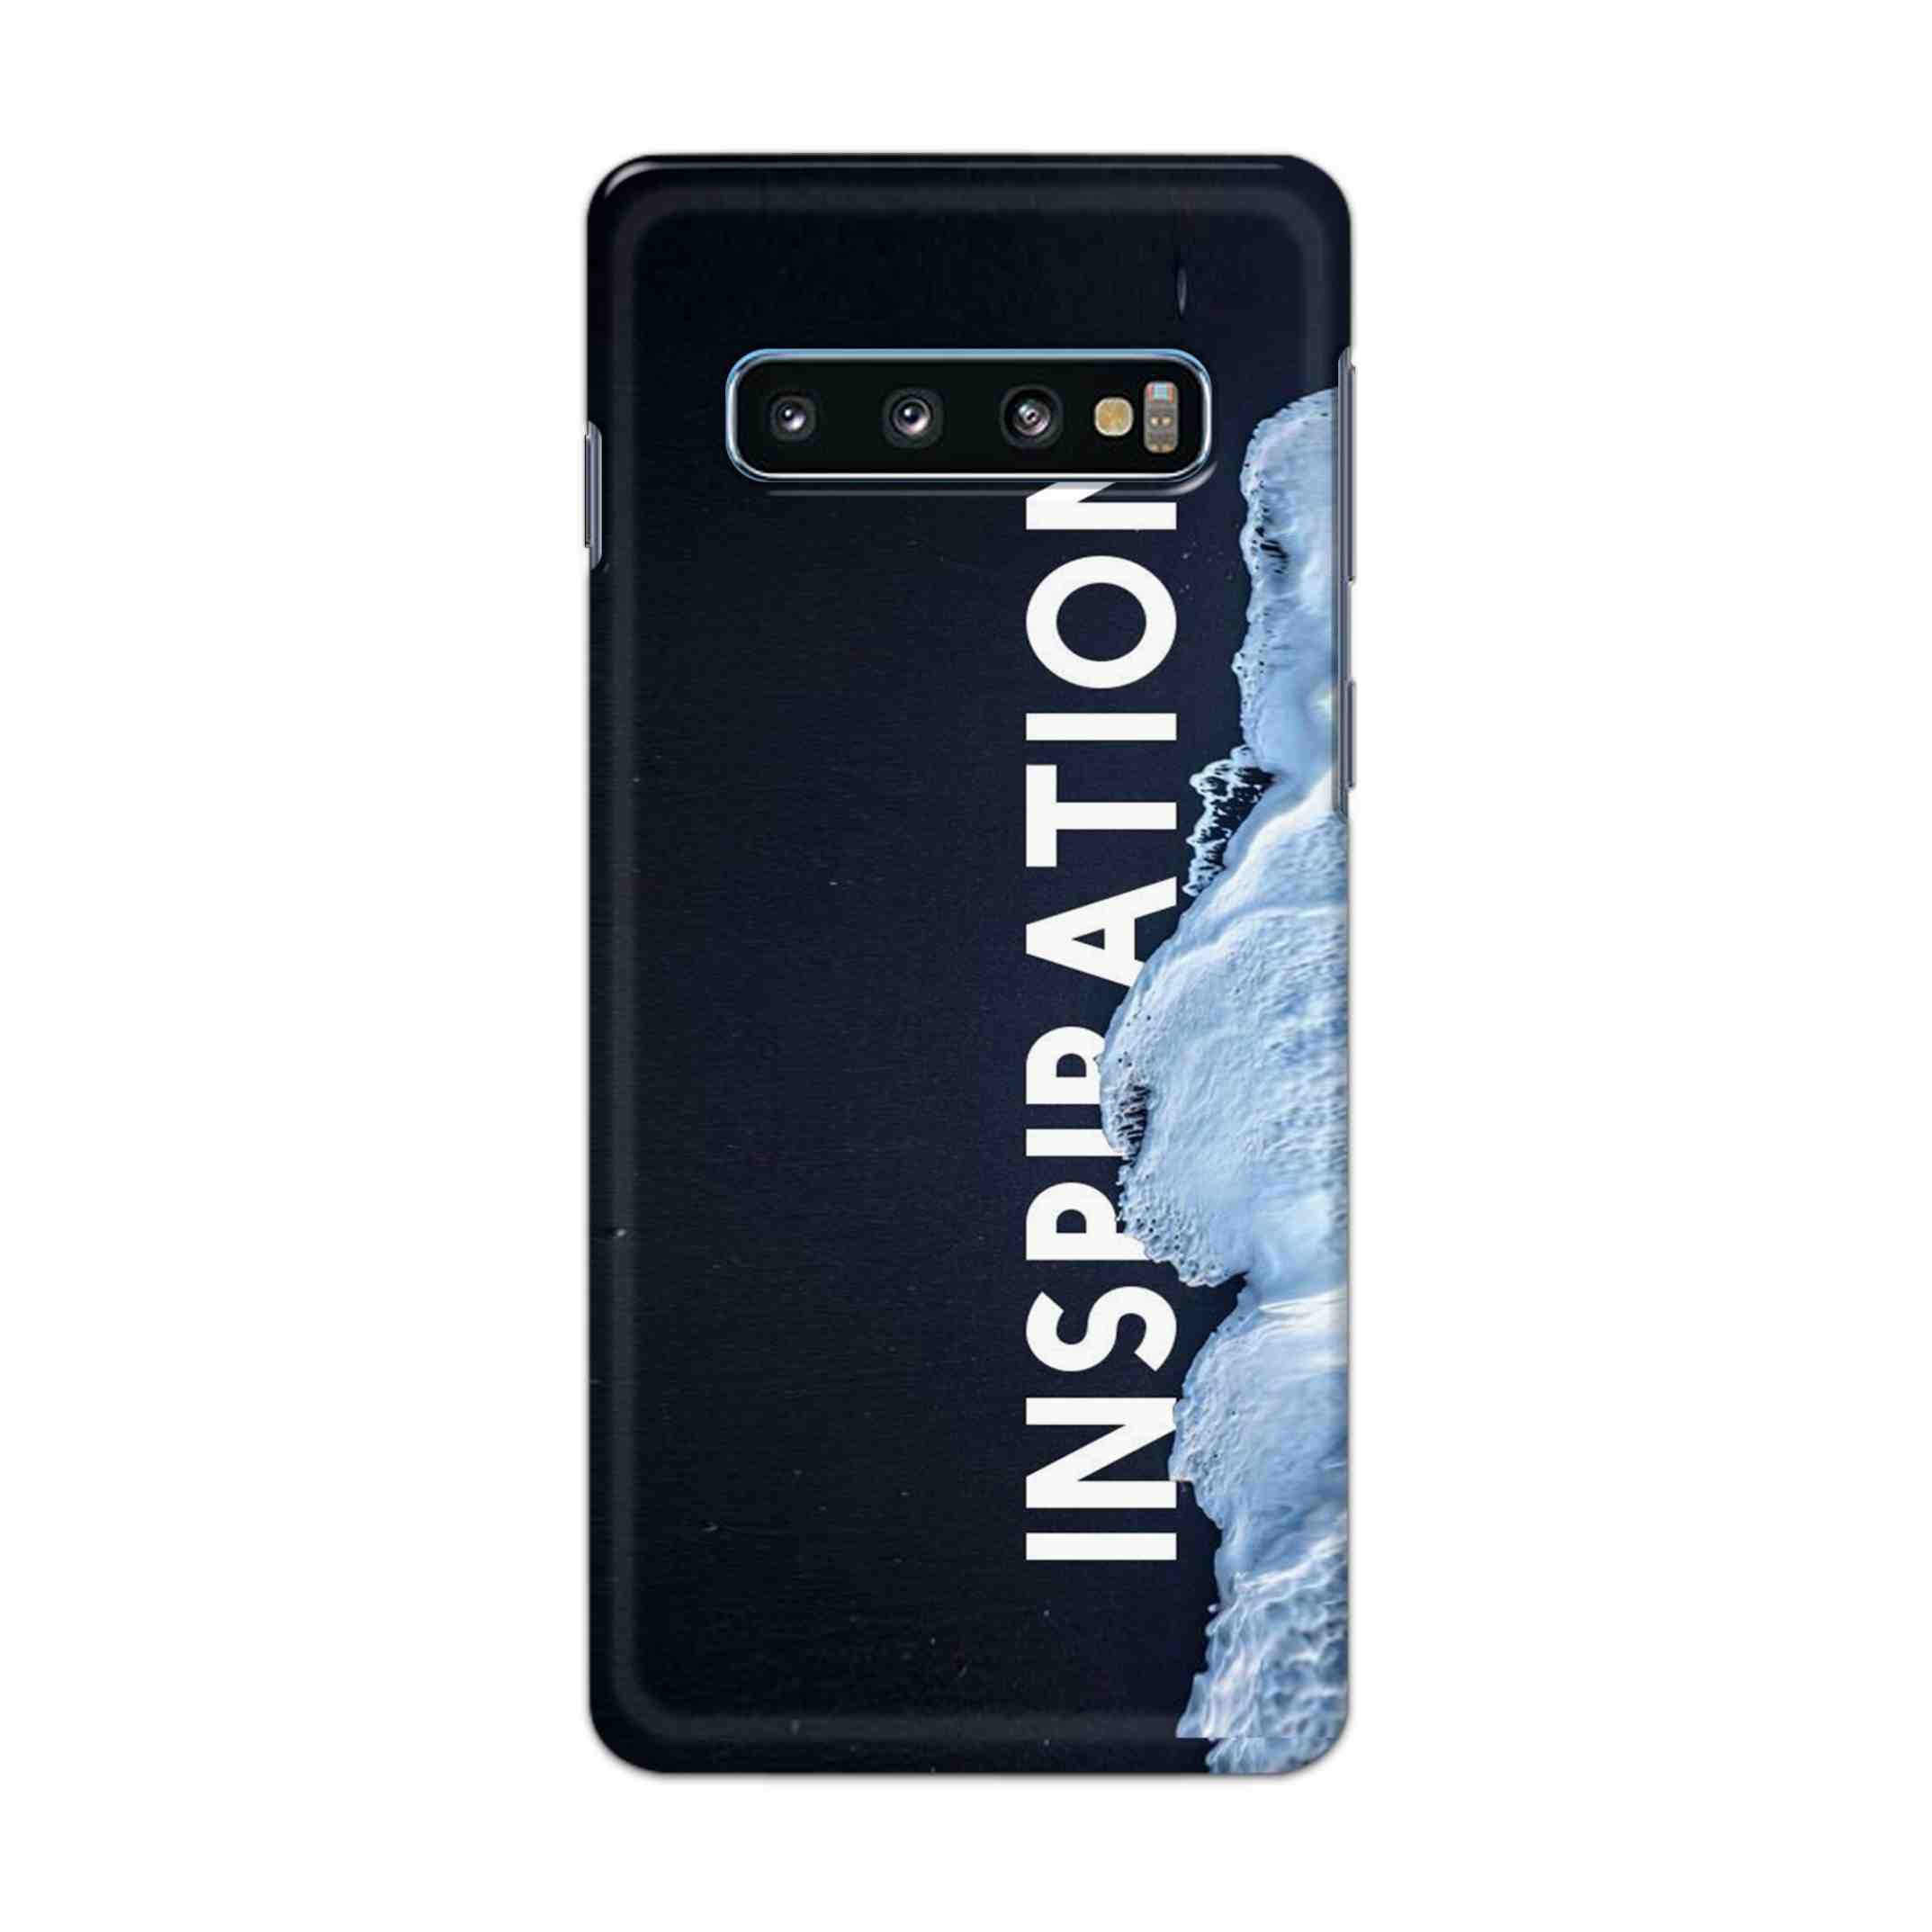 Buy Inspiration Hard Back Mobile Phone Case Cover For Samsung Galaxy S10 Plus Online